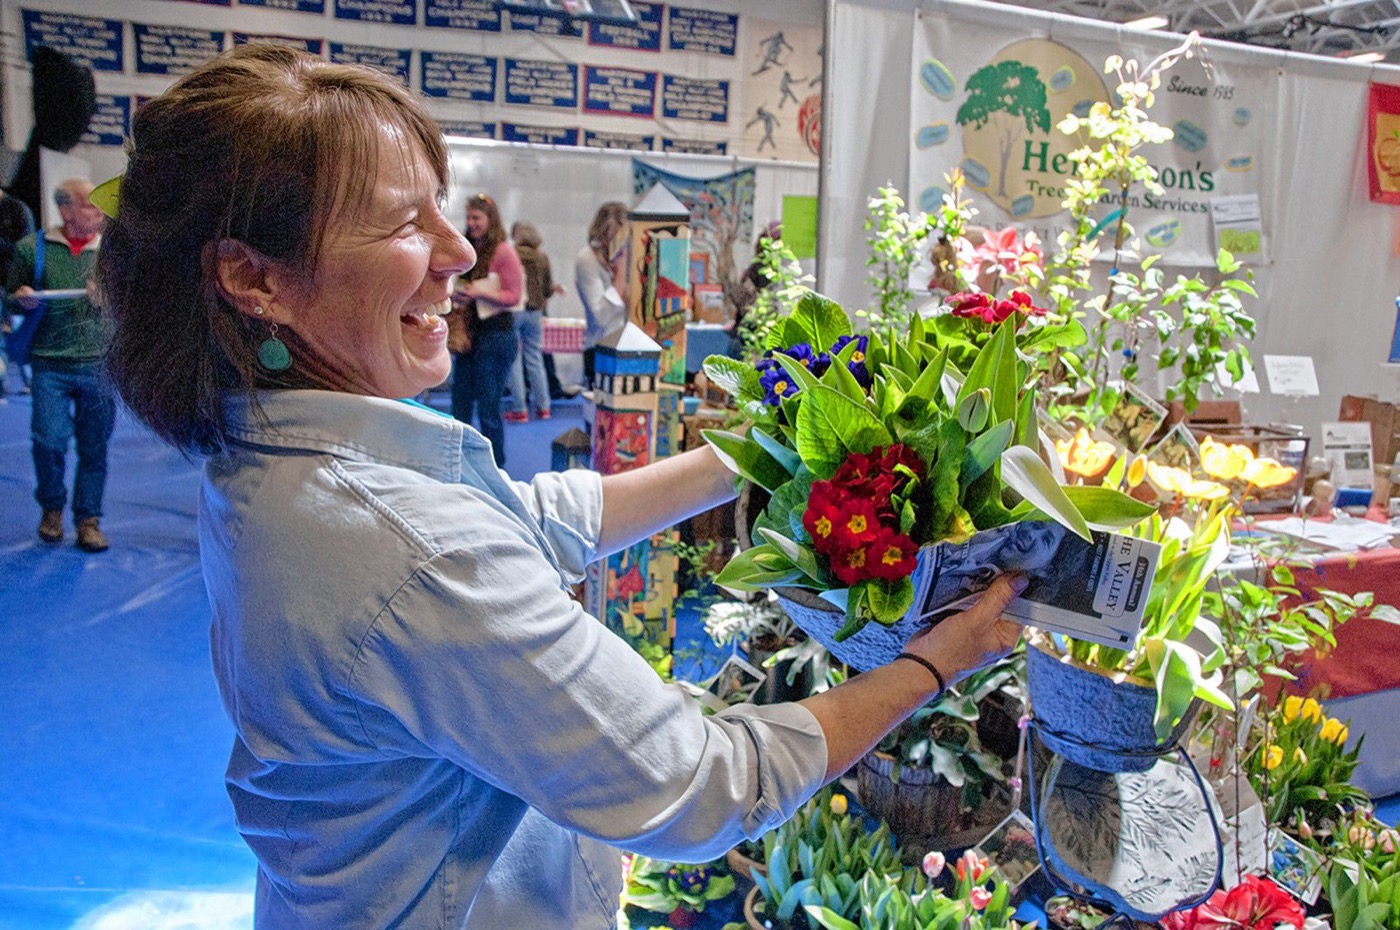 ( A COLORFUL DISPLAY Sylvia Provost, owner of Henderson’s Tree & Garden Services in White River Junction, shows off some spring flowers at the 2015 Flavors of the Valley event.